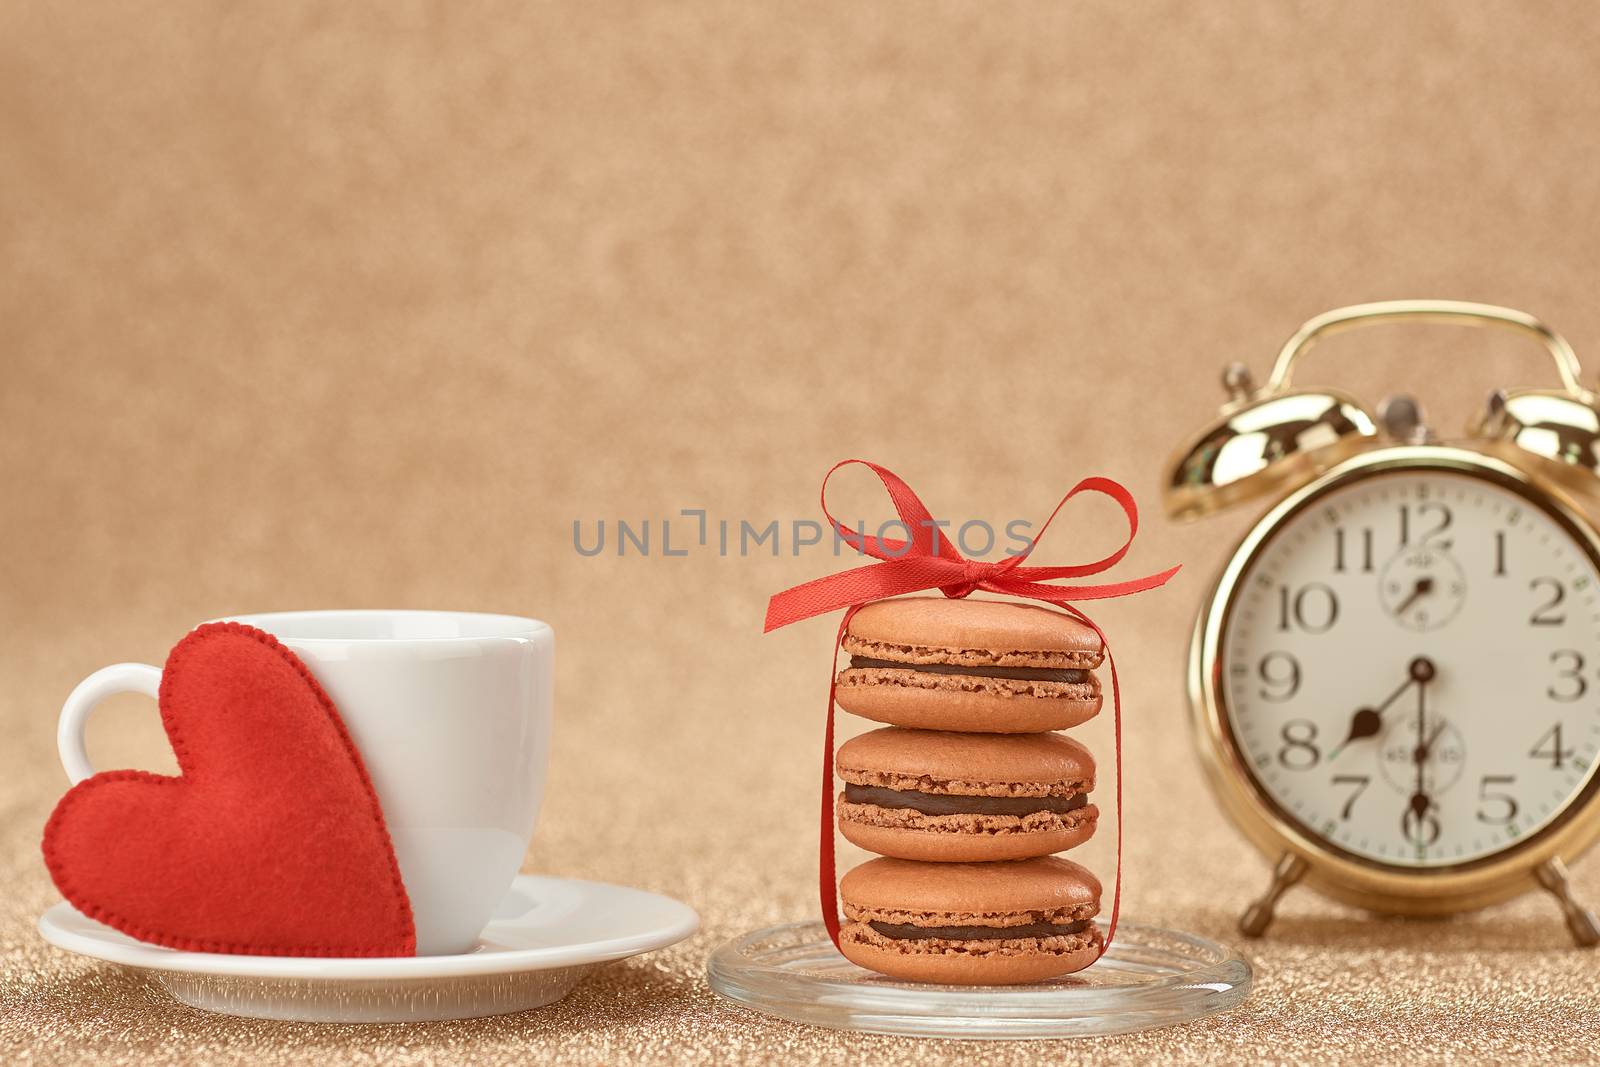 Macarons french dessert, cup of coffee.Gold alarm clock, breakfast time, red heart.Vintage retro romantic style.Unusual creative art greeting card, shiny background. Love,Valentines Day